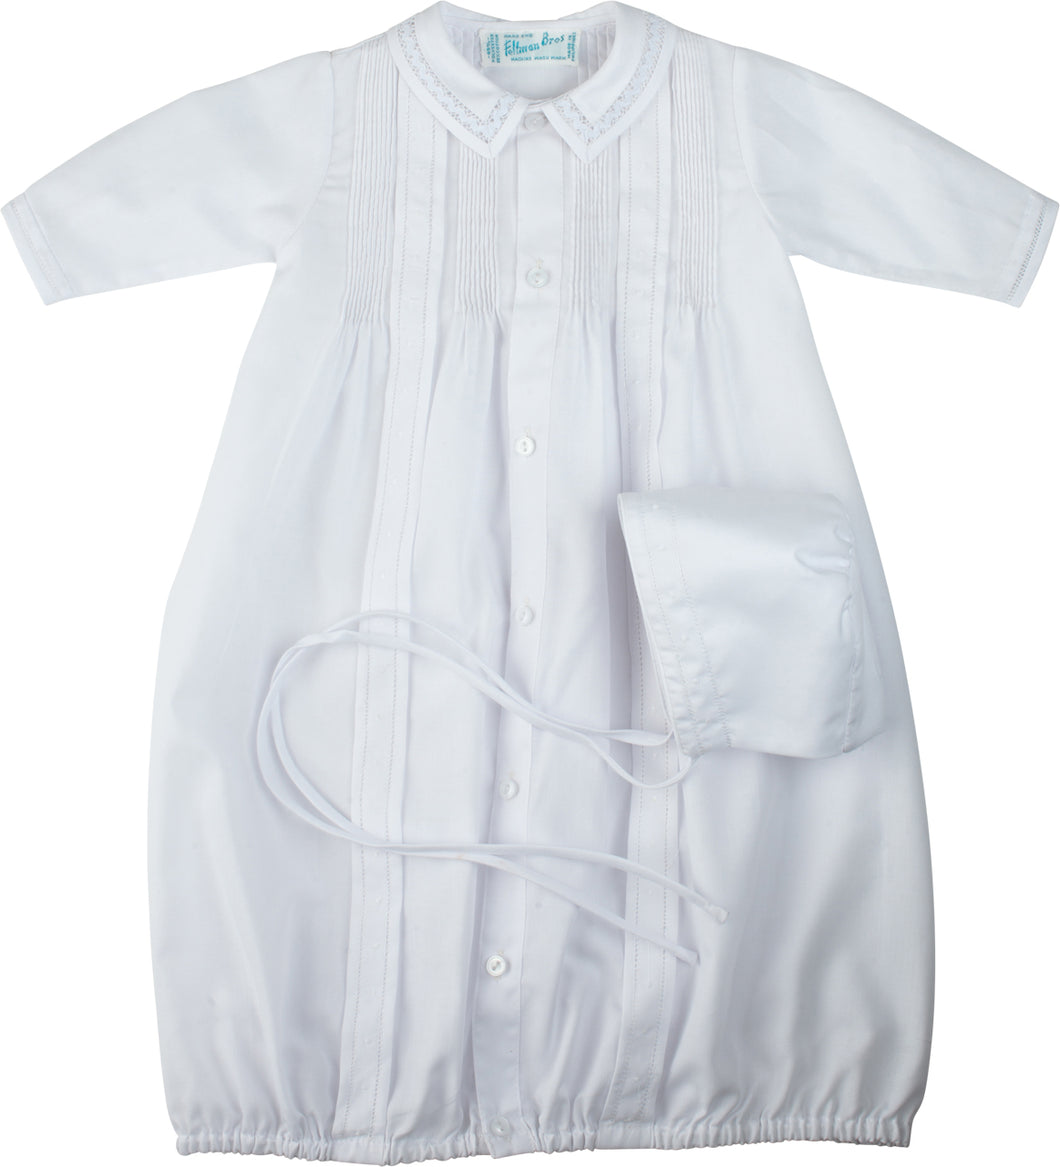 Unisex White Take-Me-Home Gown & Hat